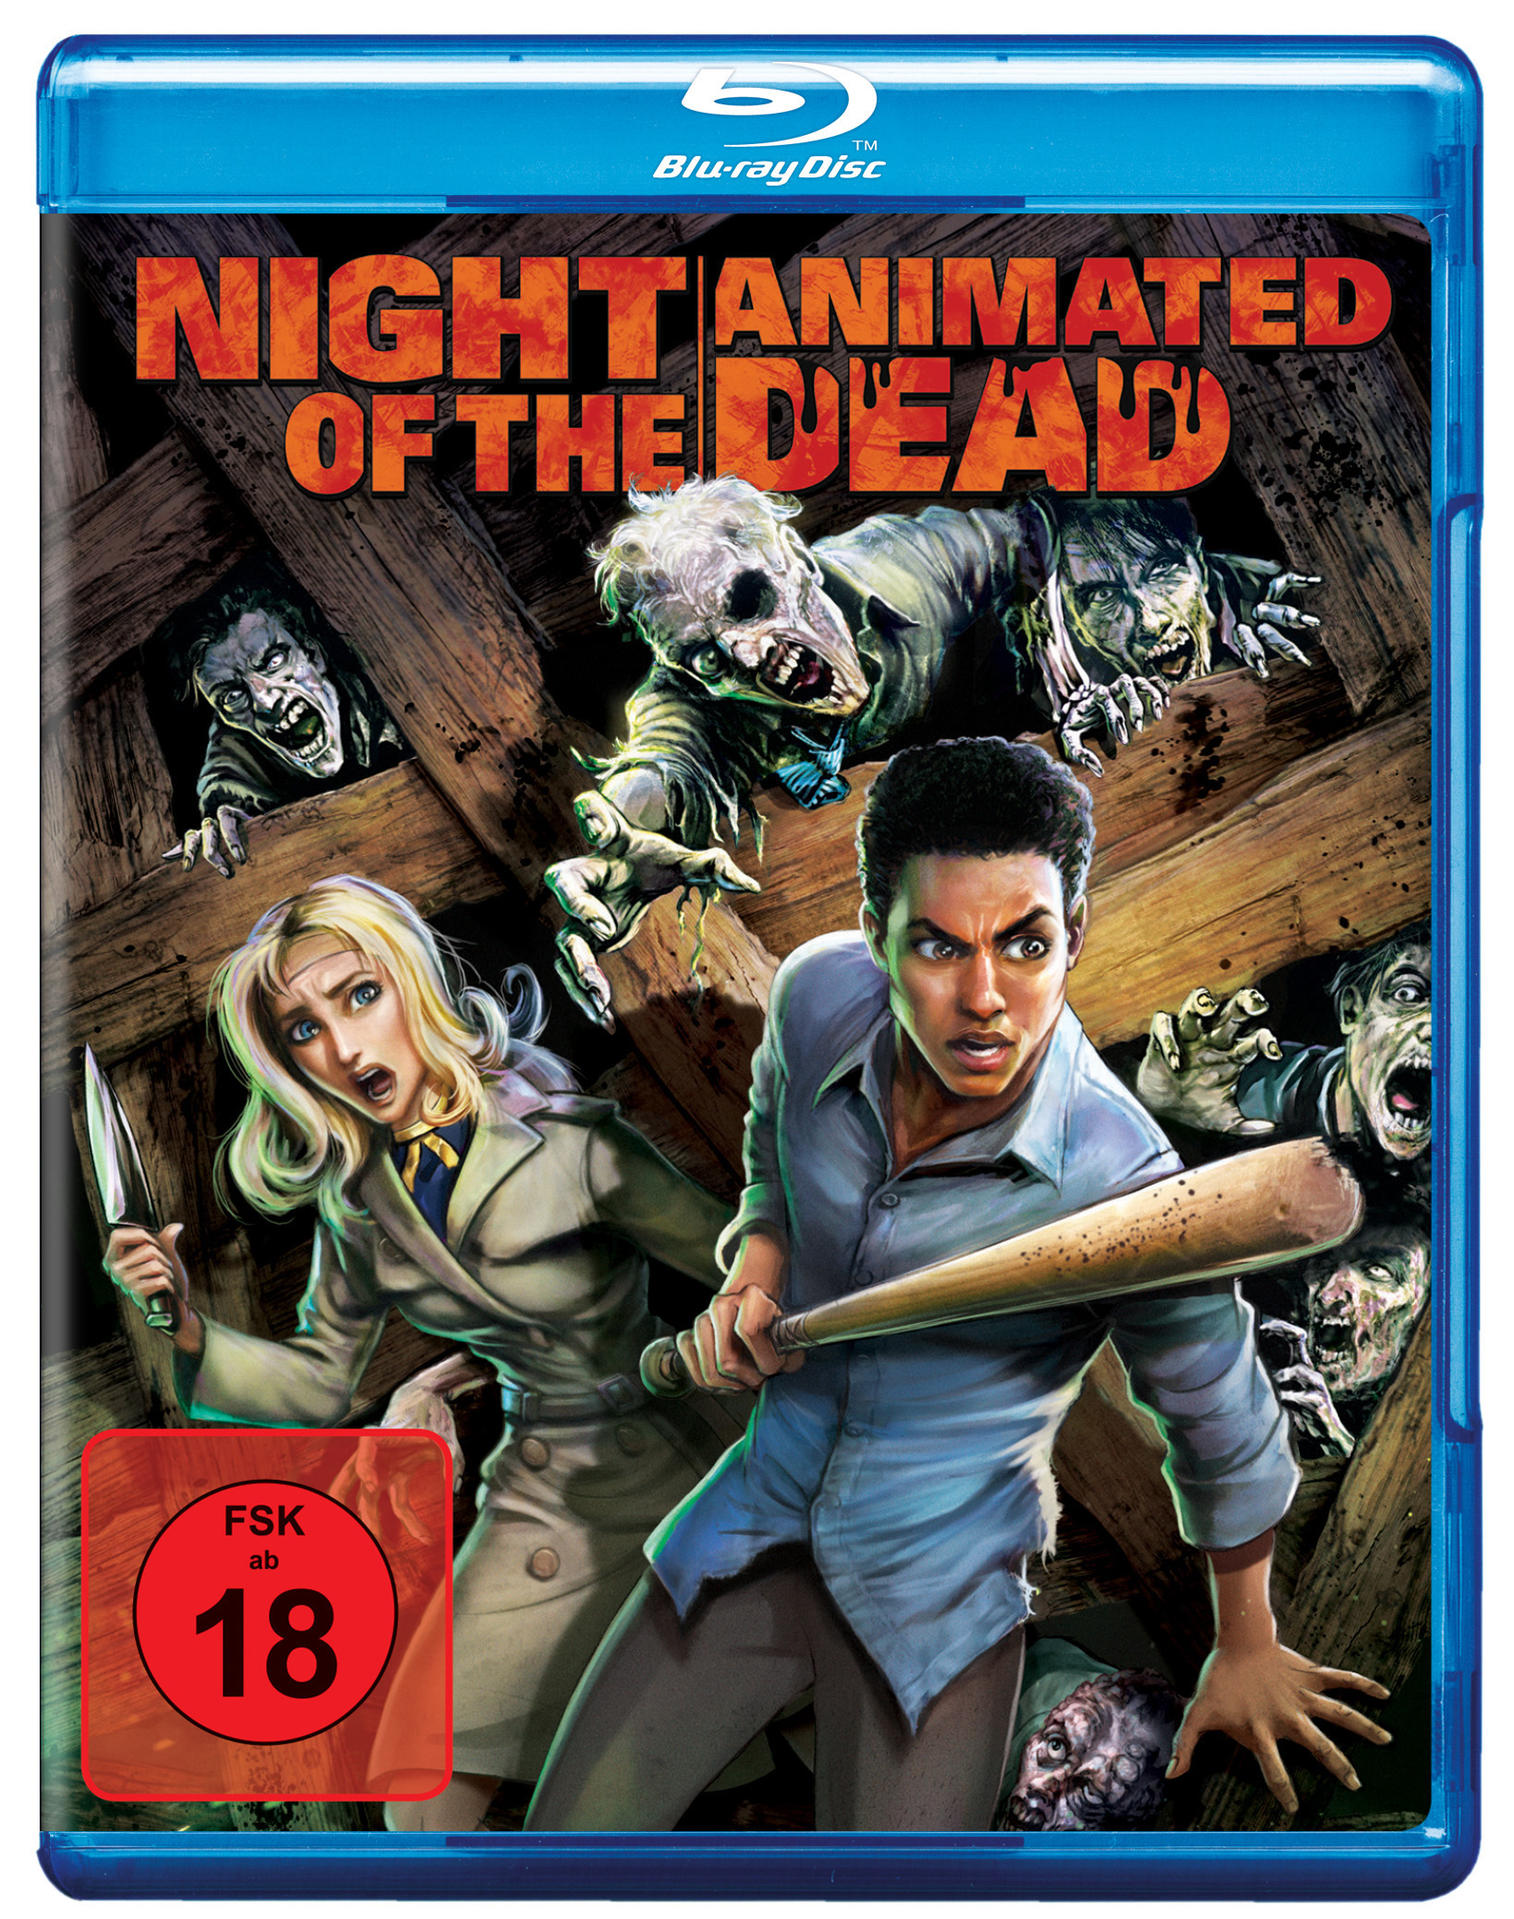 Night of the Animated Dead Blu-ray